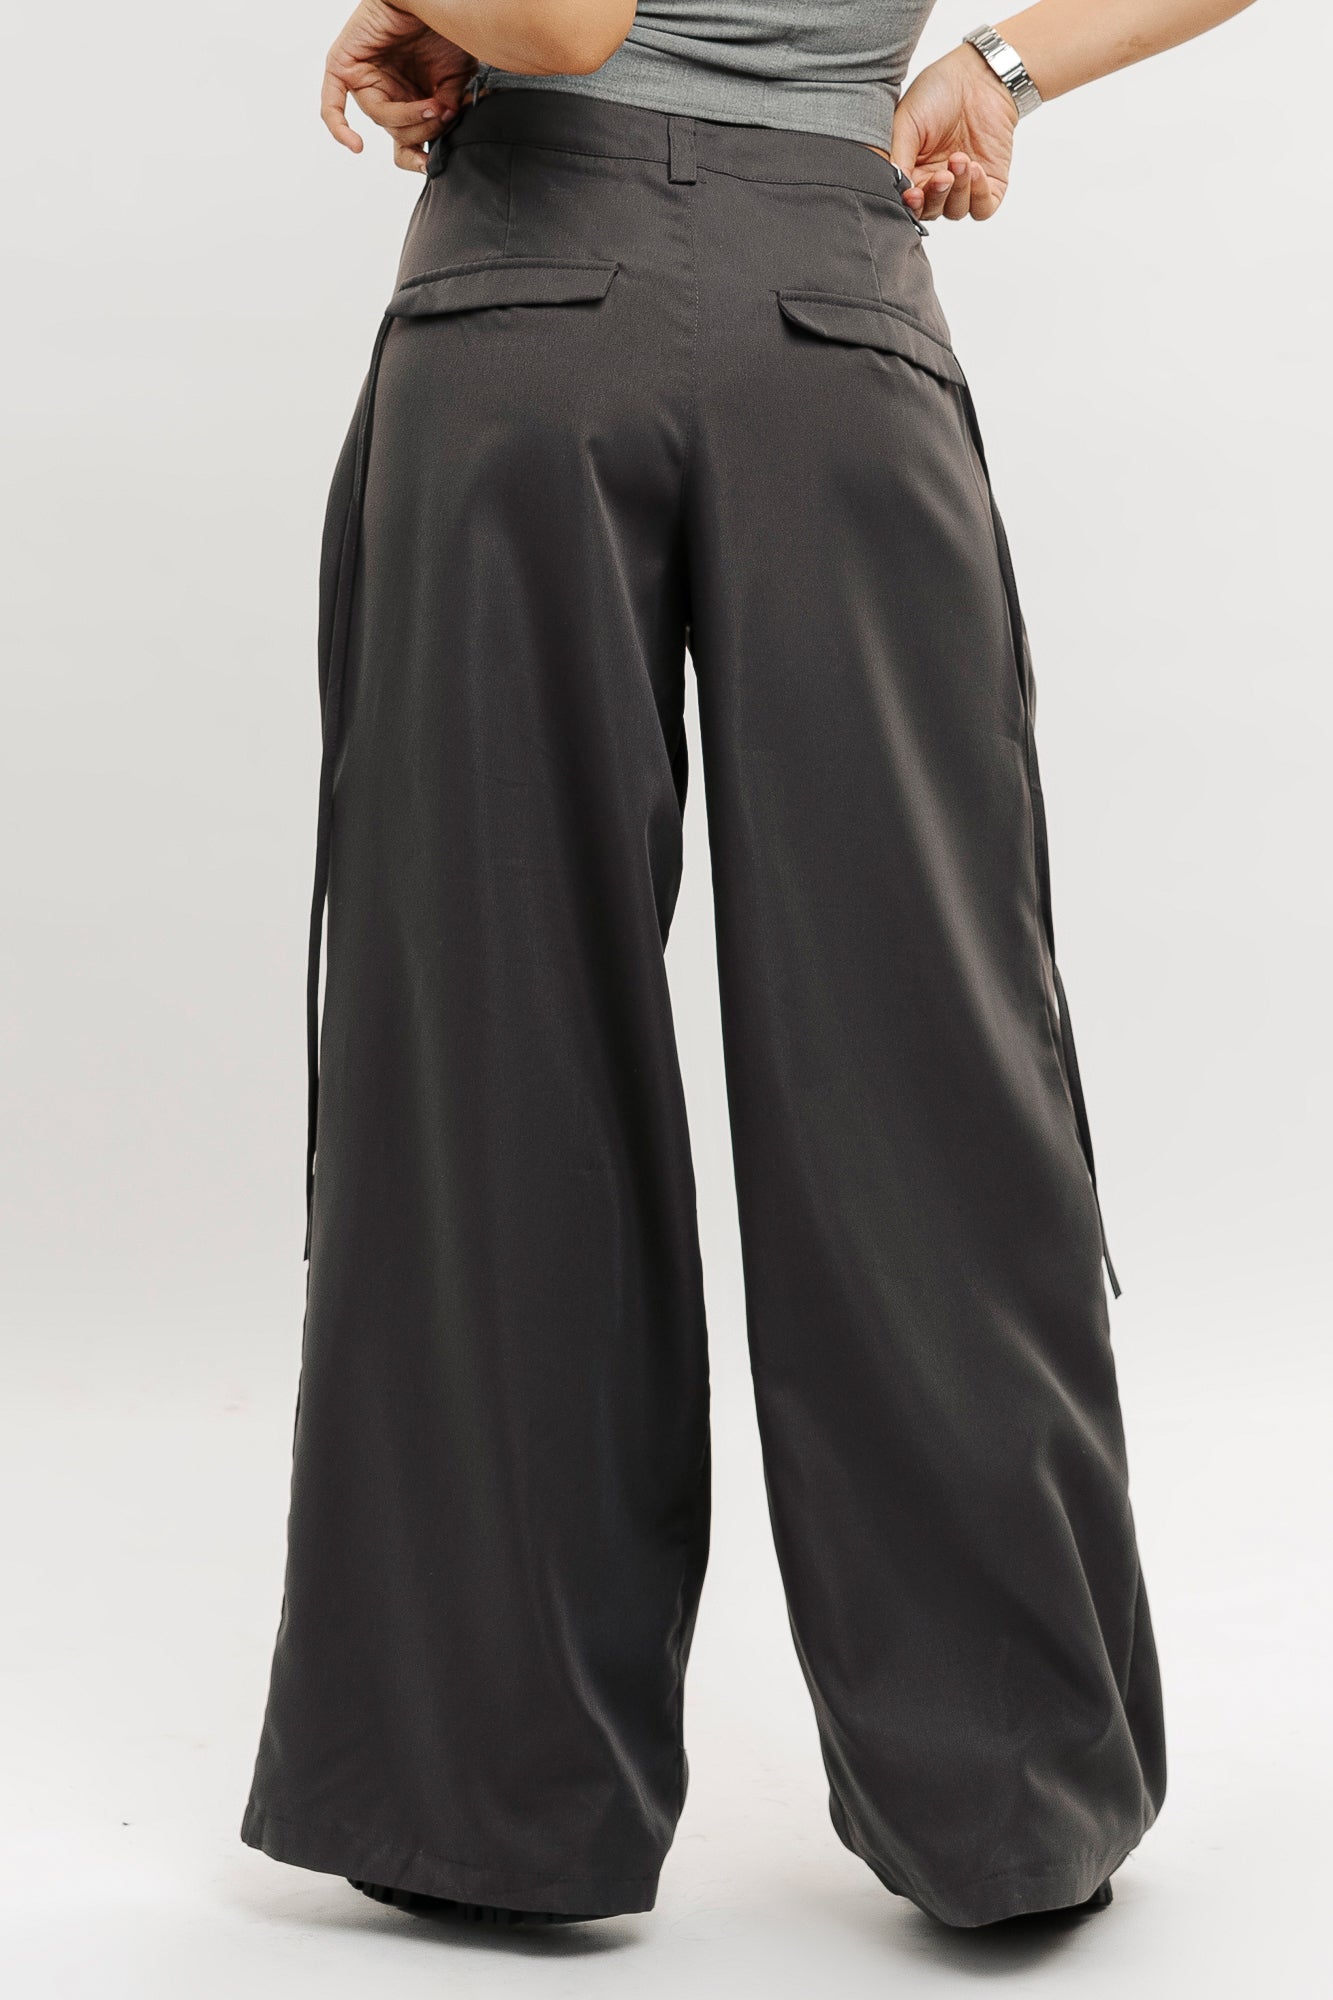 GREY MUAVE FRONT PLEATED PANTS